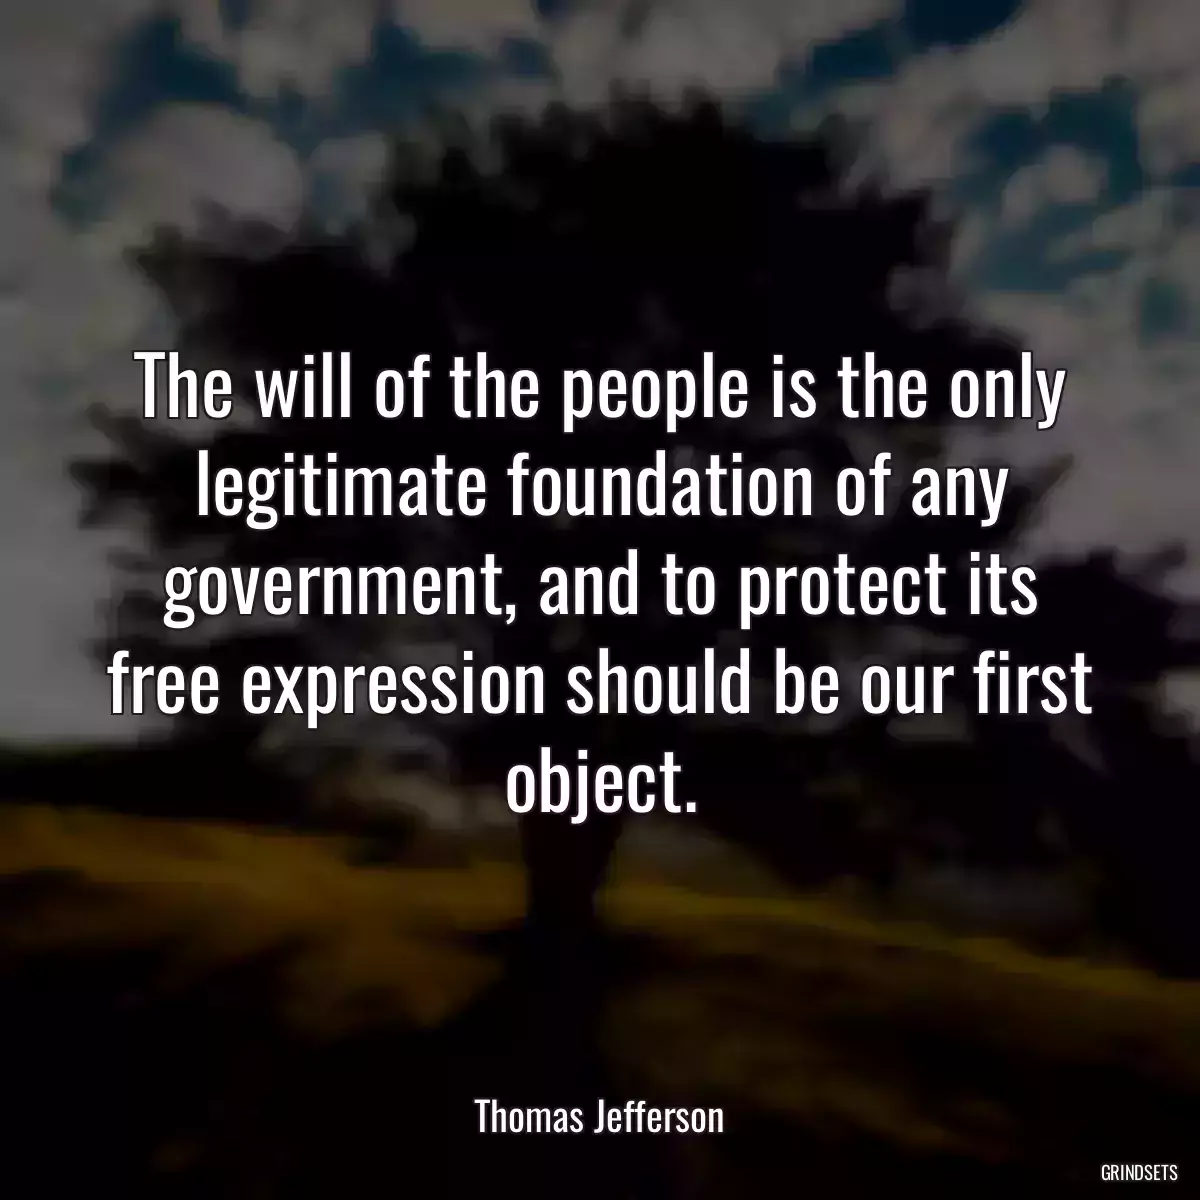 The will of the people is the only legitimate foundation of any government, and to protect its free expression should be our first object.